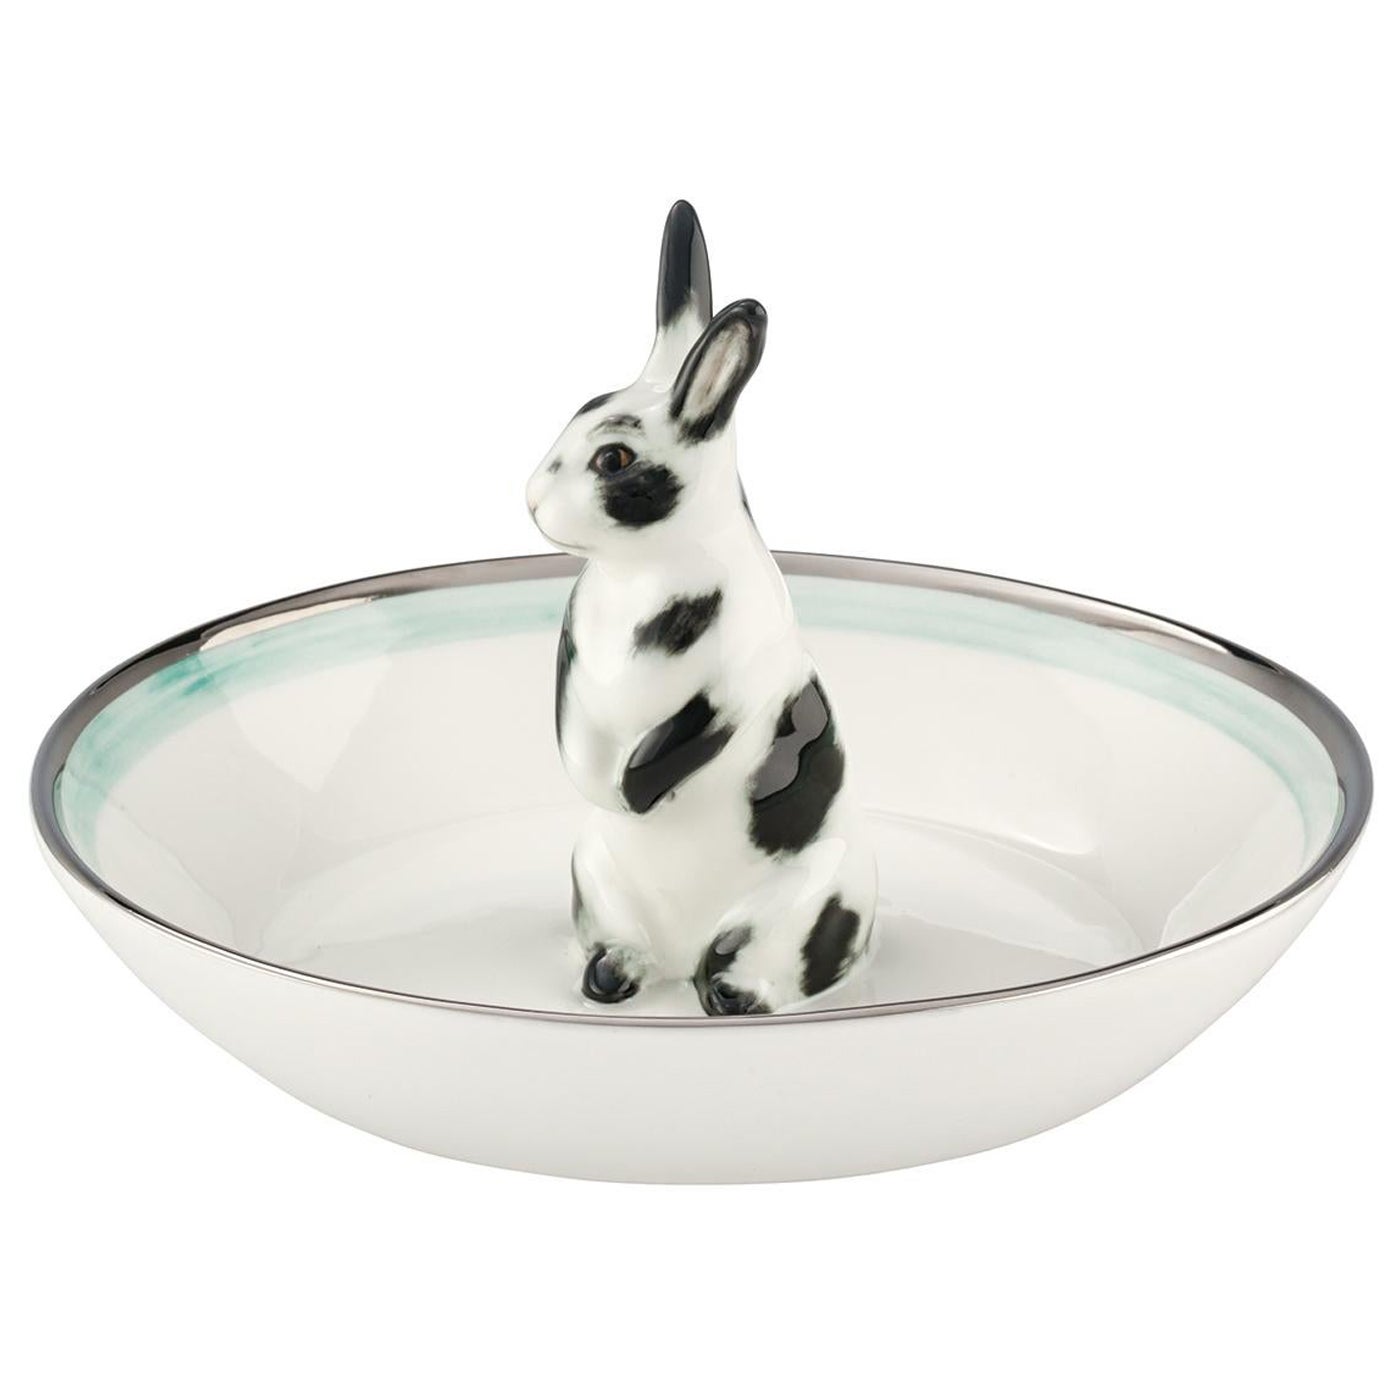 Country Style Easter Bowl Porcelain with Hare Figure Sofina Boutique Kitzbuehel